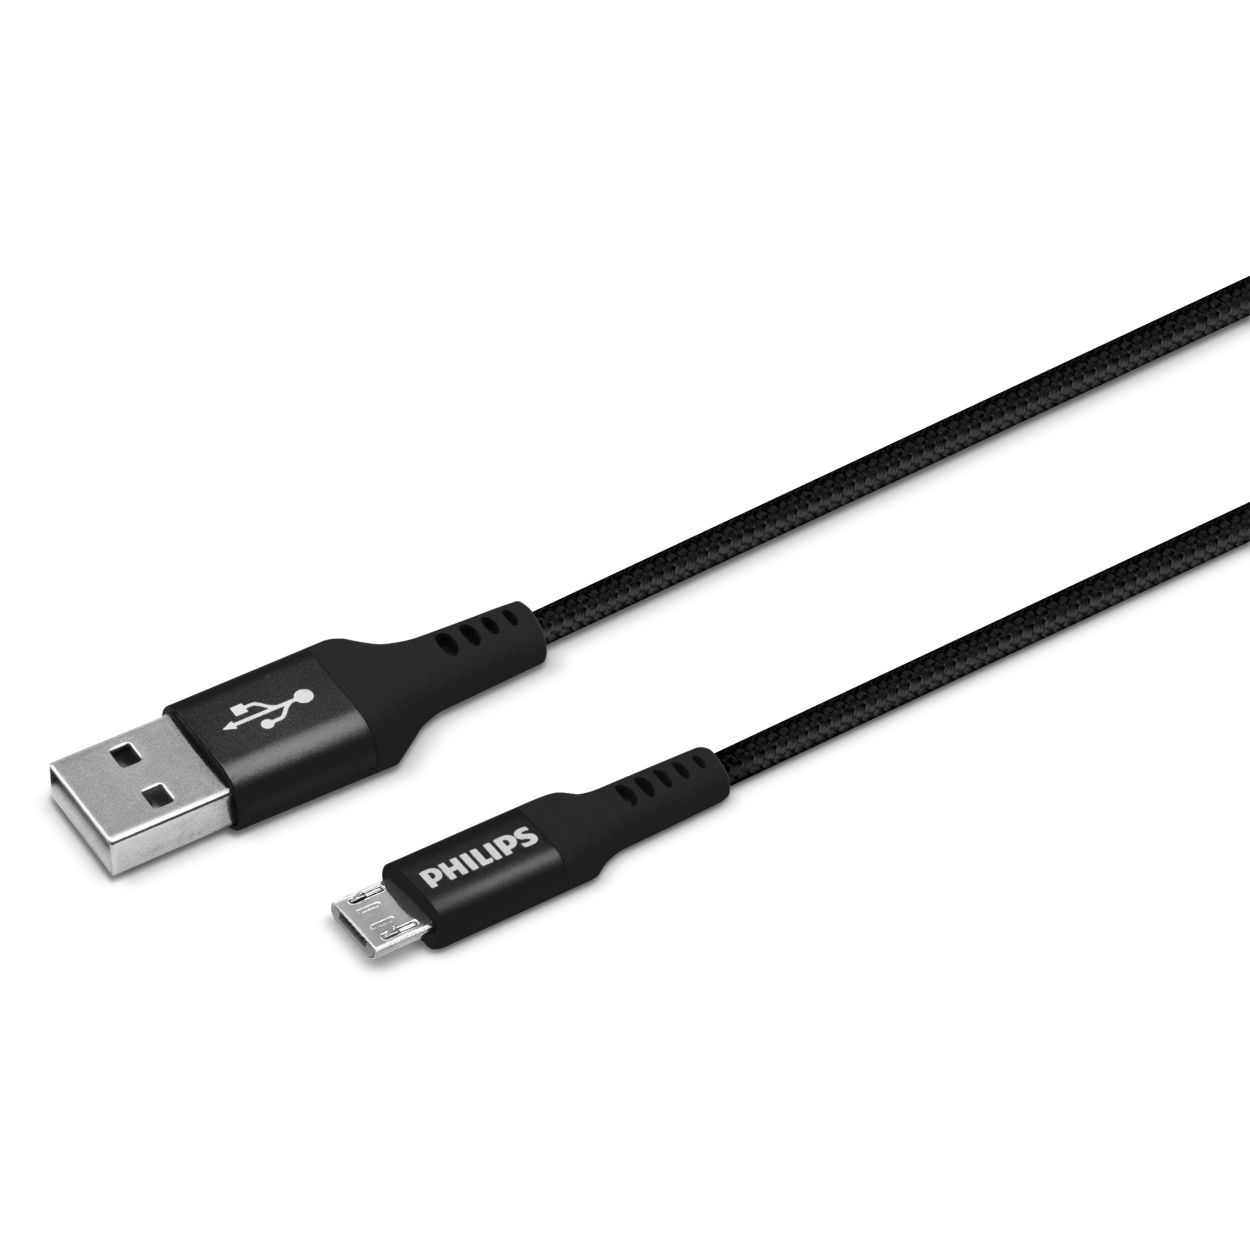 USB to cable DLC5203U/00 Philips